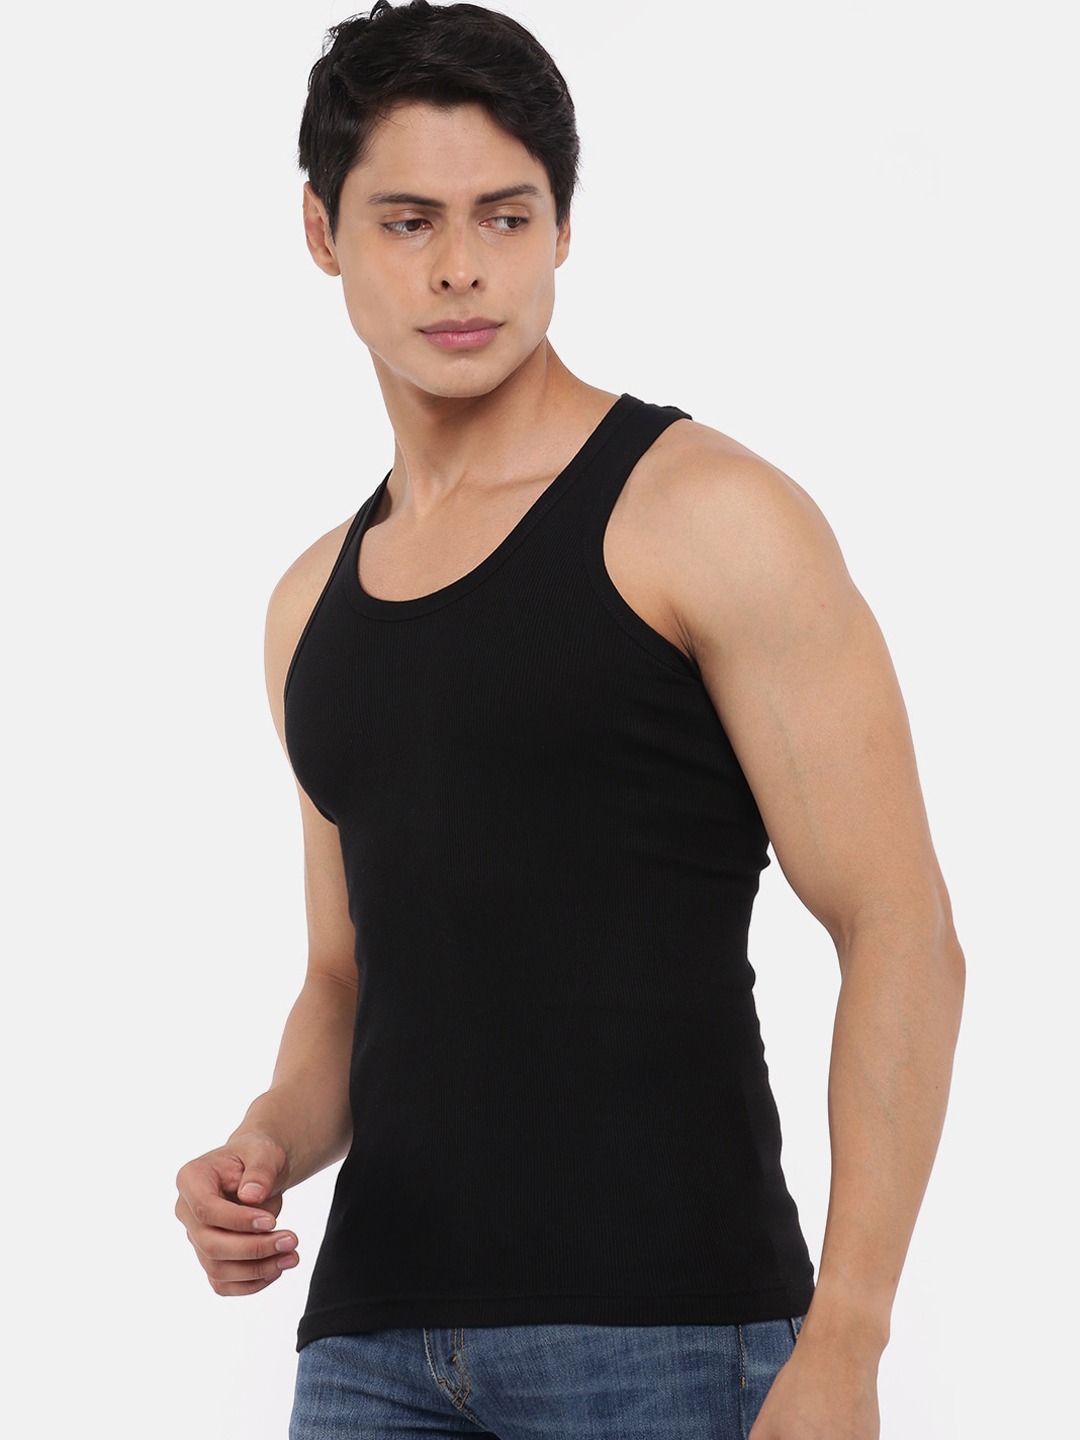 Clothing Innerwear Vests | Dollar Bigboss Men Pack Of 10 Solid Pure Combed Cotton Innerwear Vests - DY99928